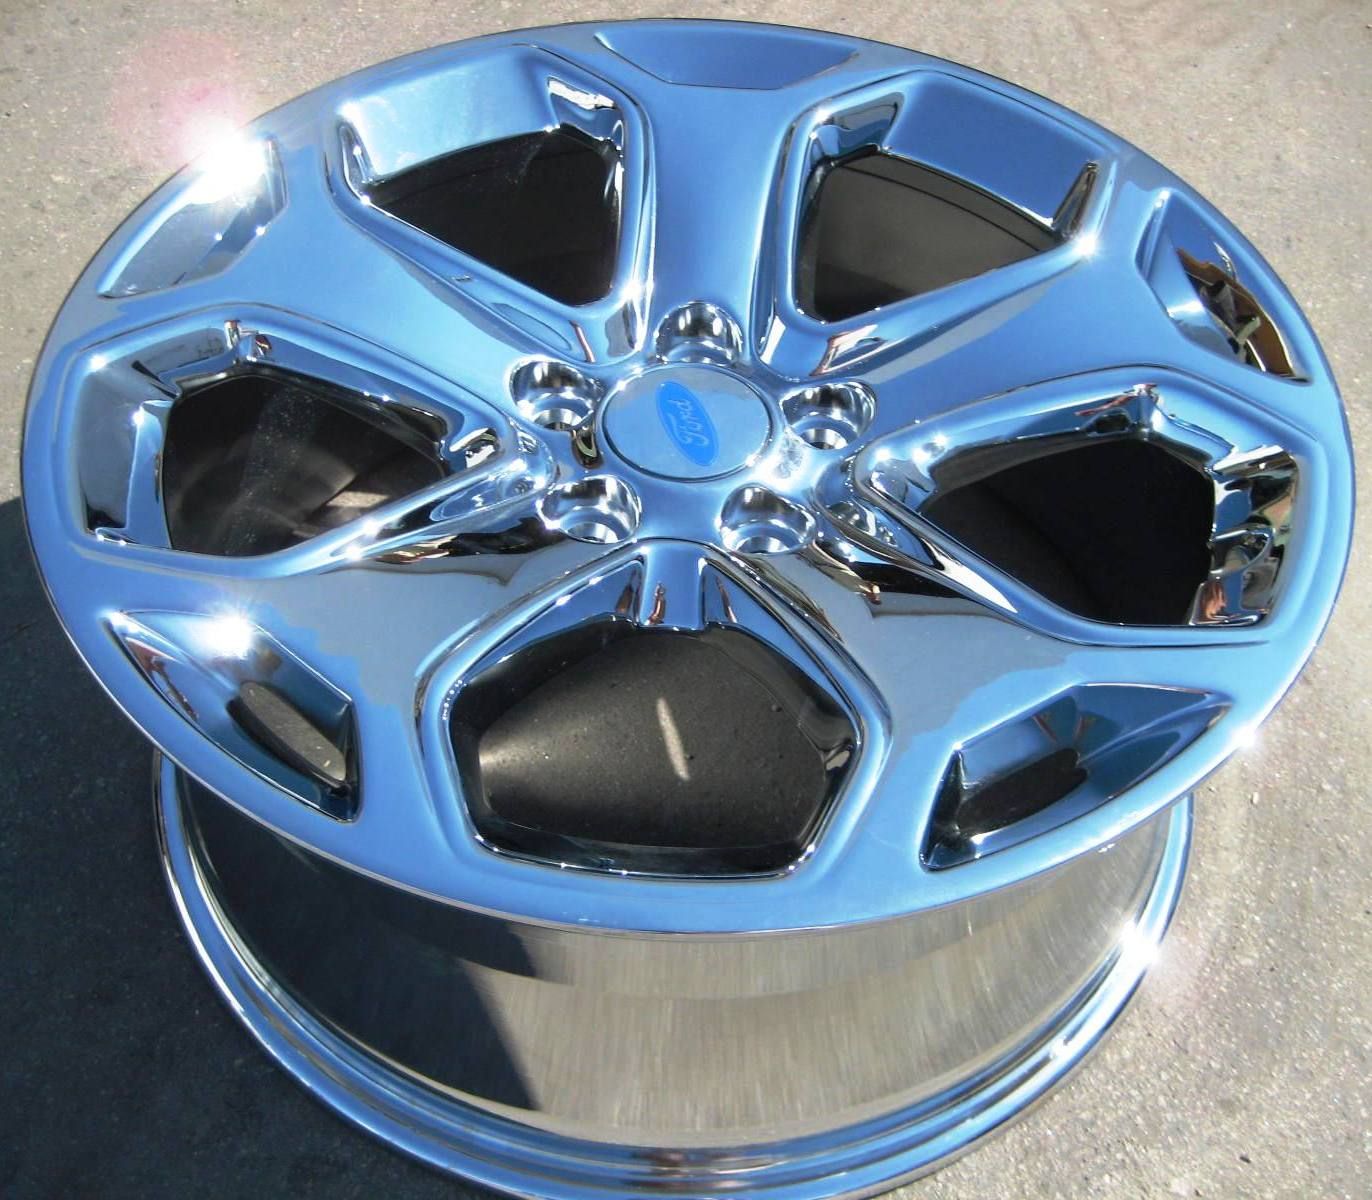 NEW 18 FACTORY FORD EDGE OEM CHROME WHEELS RIMS 2010 13 3848 OUTRIGHT